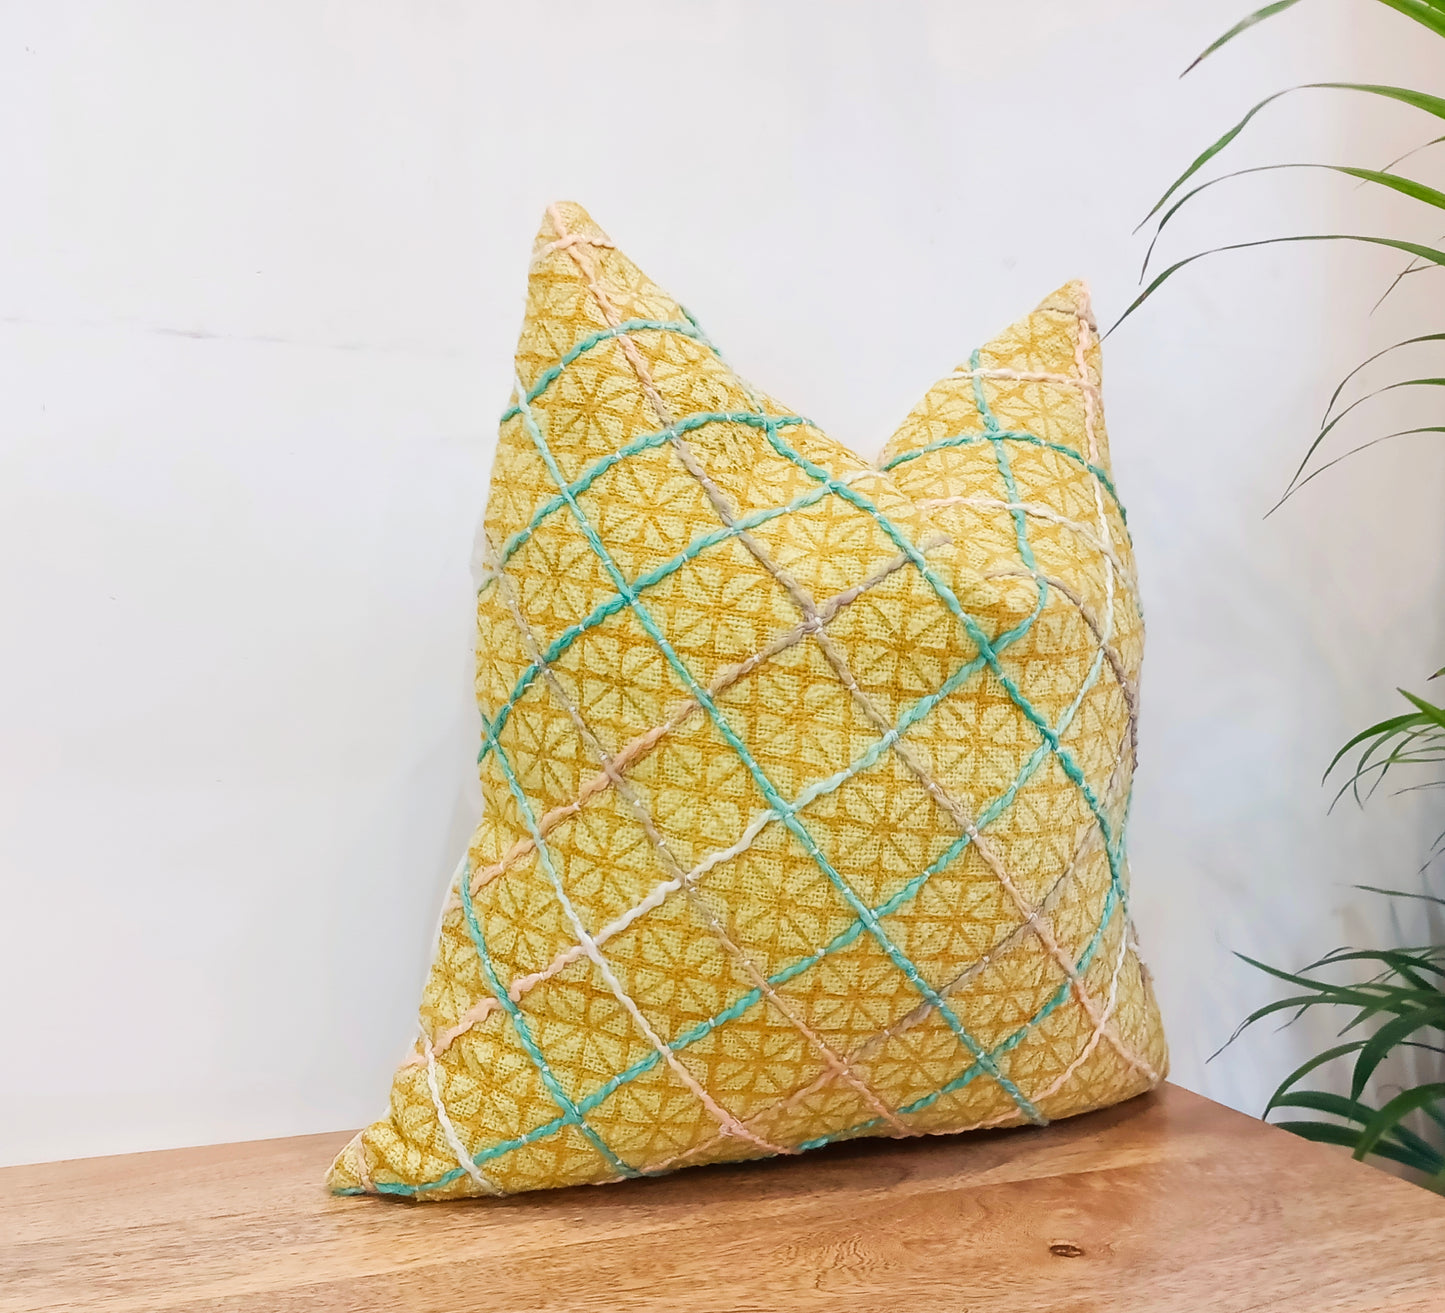 Yellowish Set of 2 Handwoven Square Cushion Covers